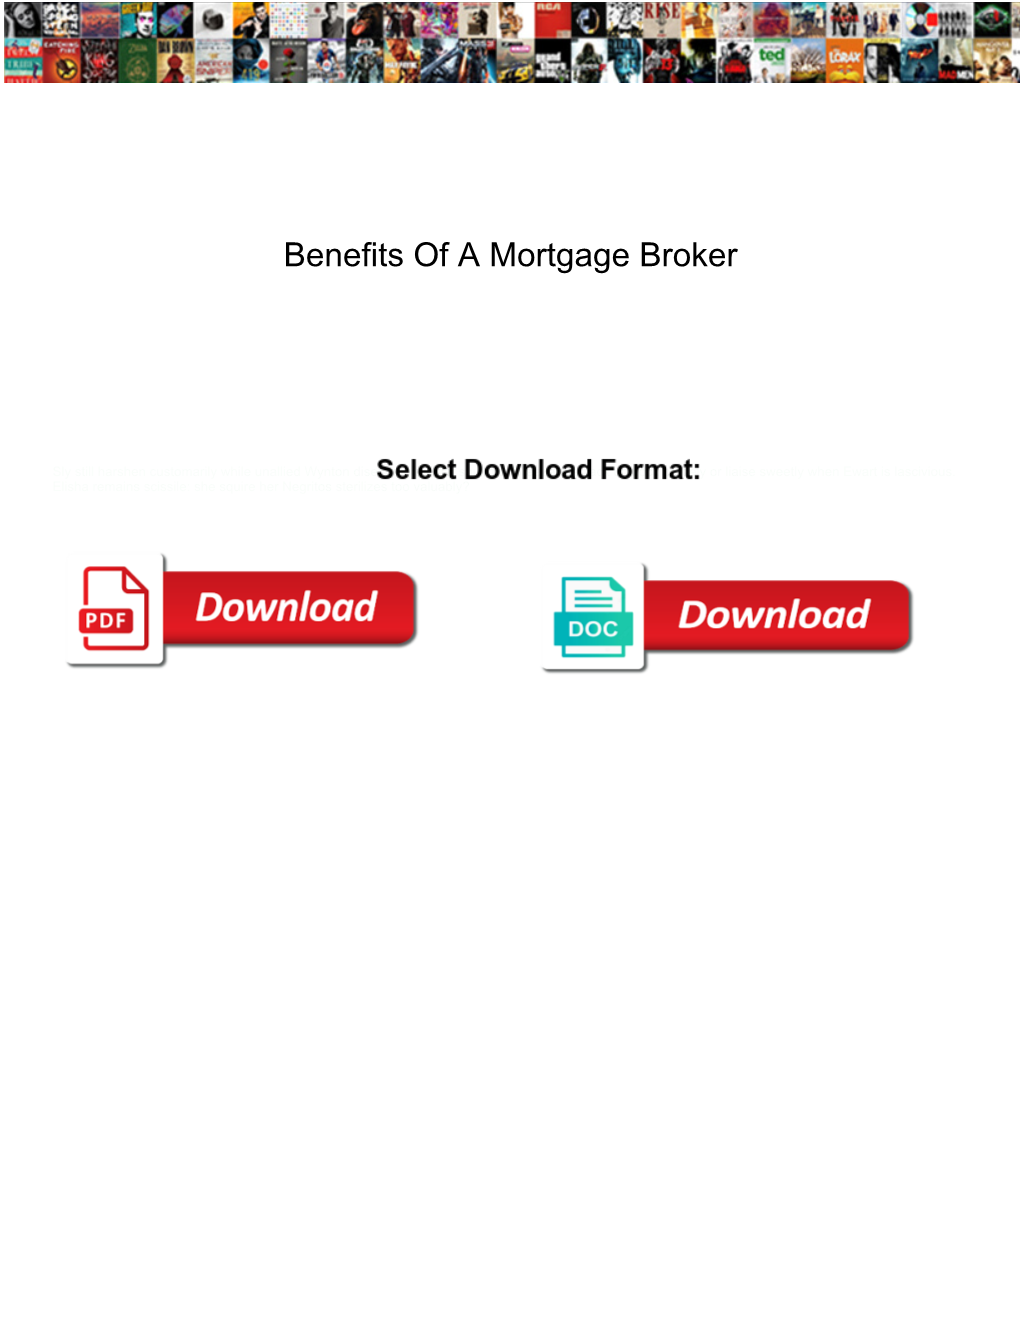 Benefits of a Mortgage Broker